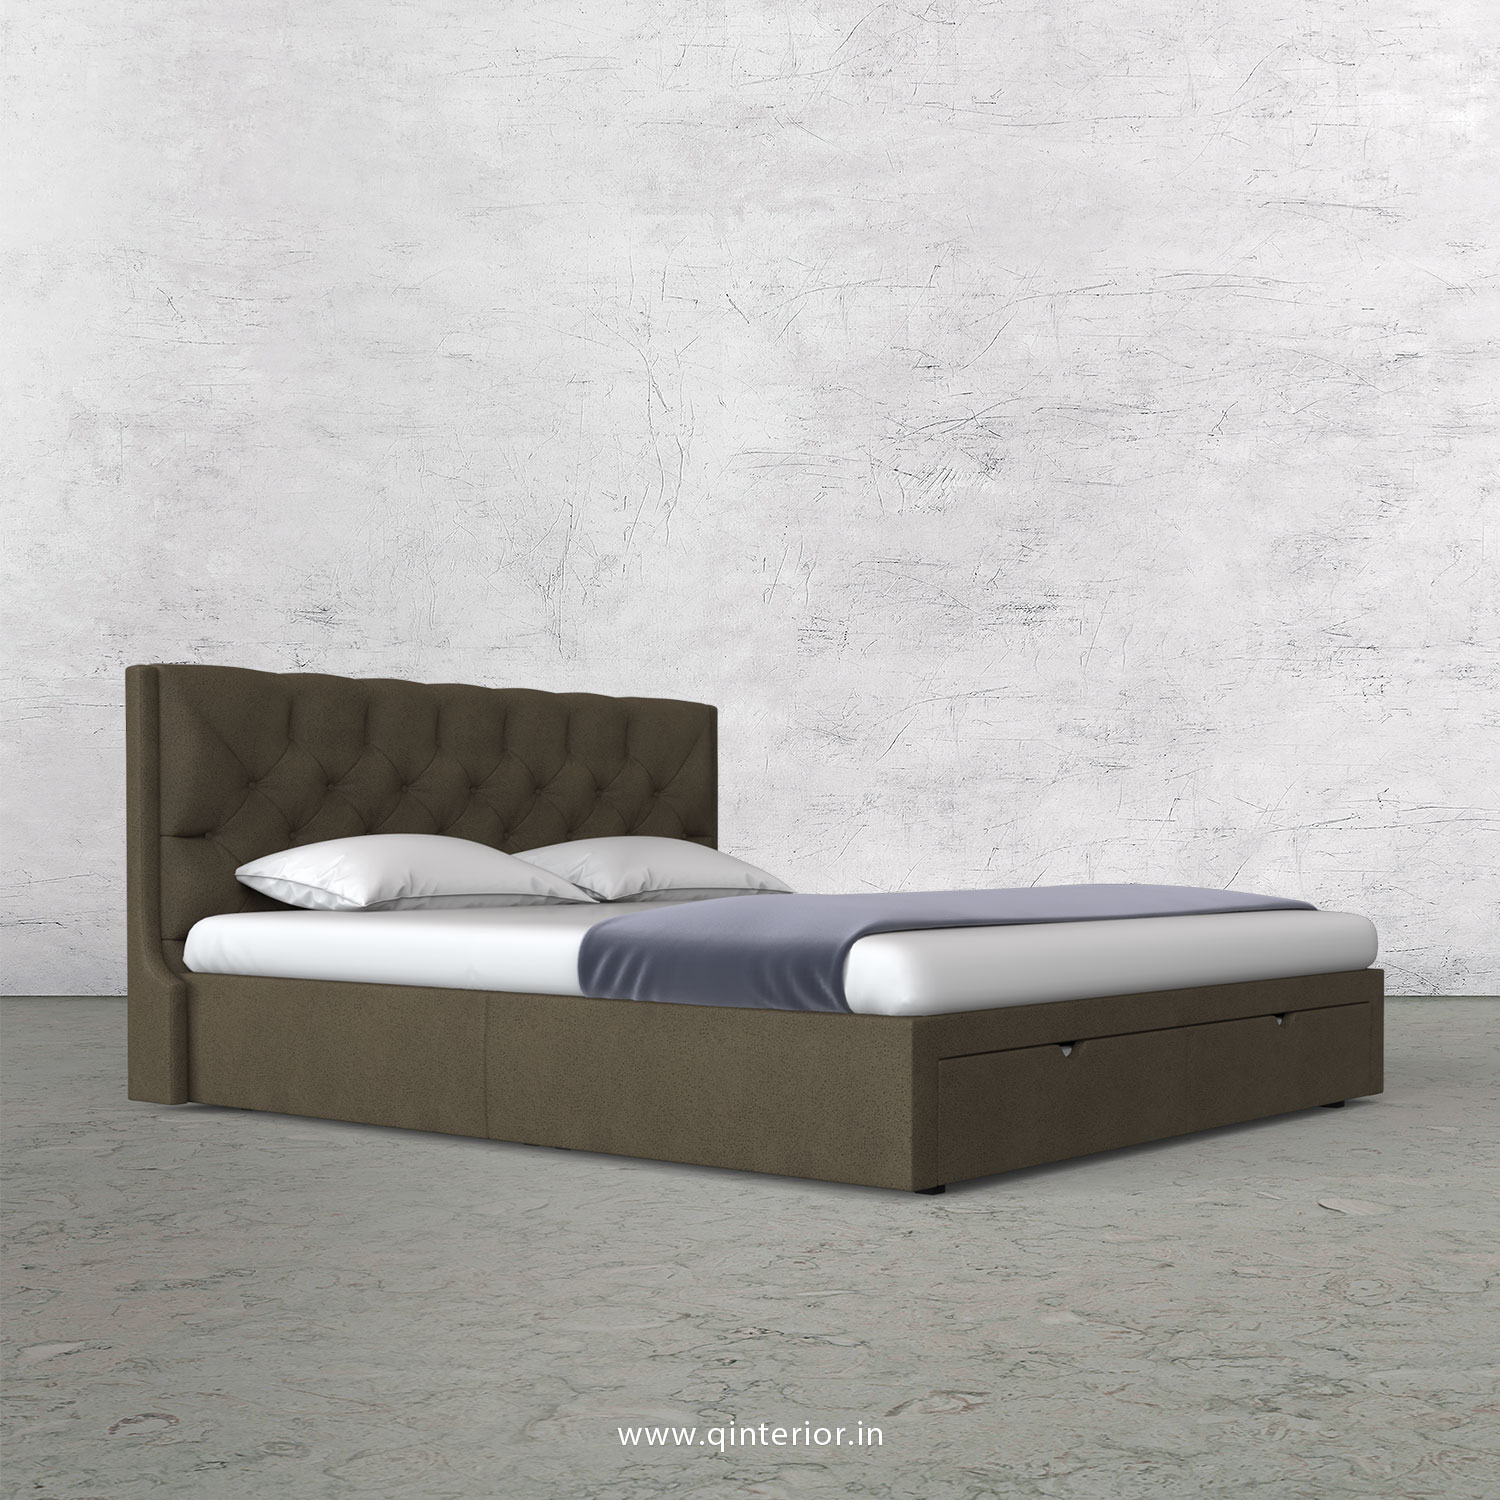 Scorpius Queen Storage Bed in Fab Leather Fabric - QBD001 FL06